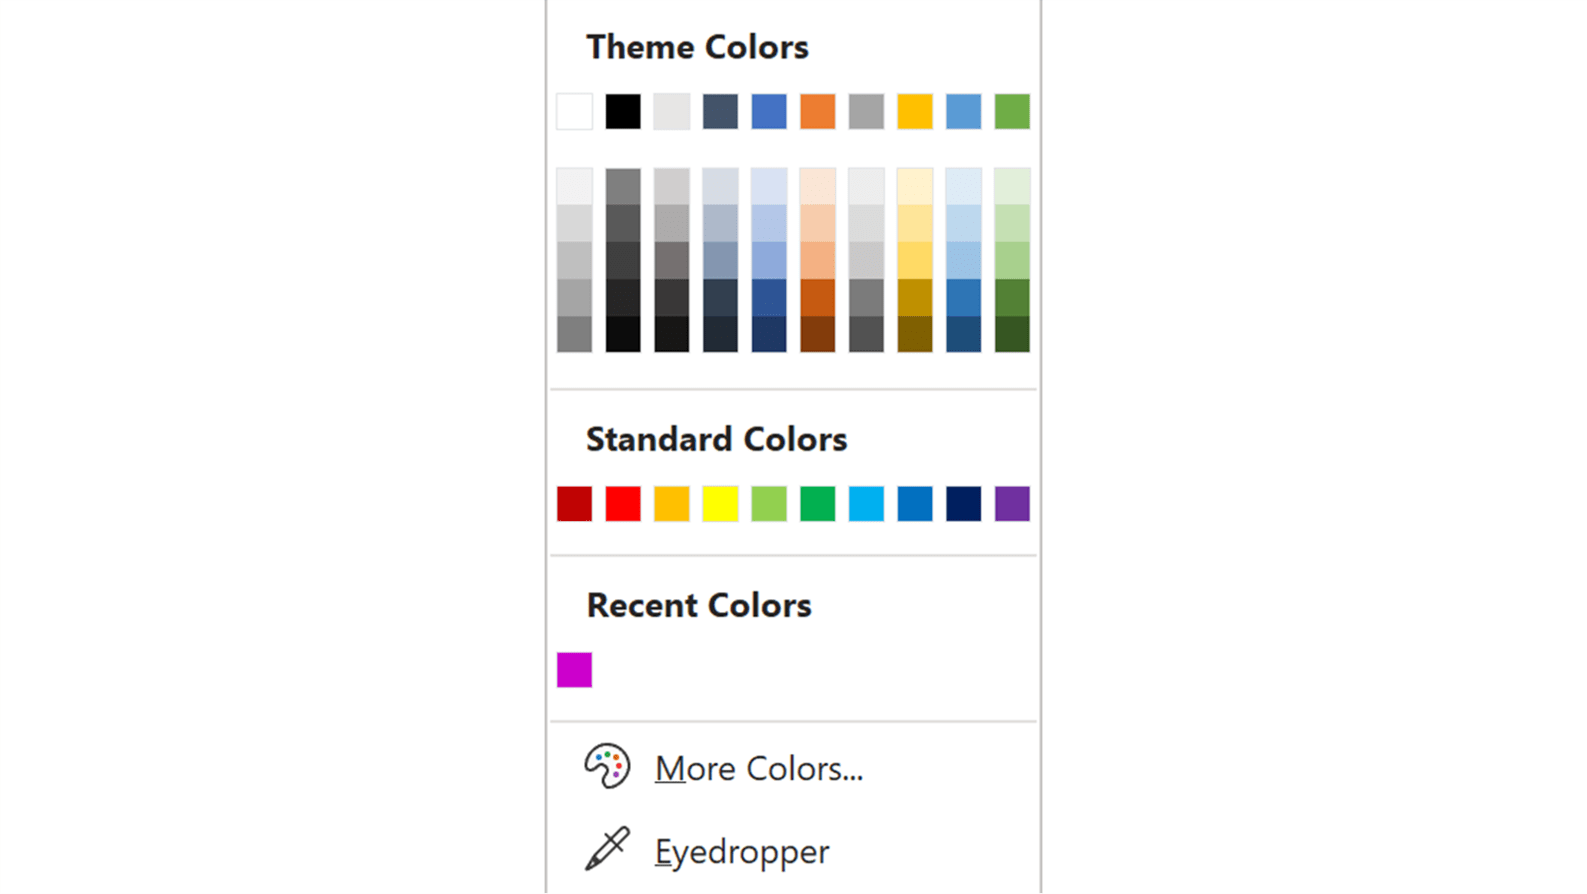 Screenshot of the Theme Colors panel in PowerPoint showing the Recent Colors section